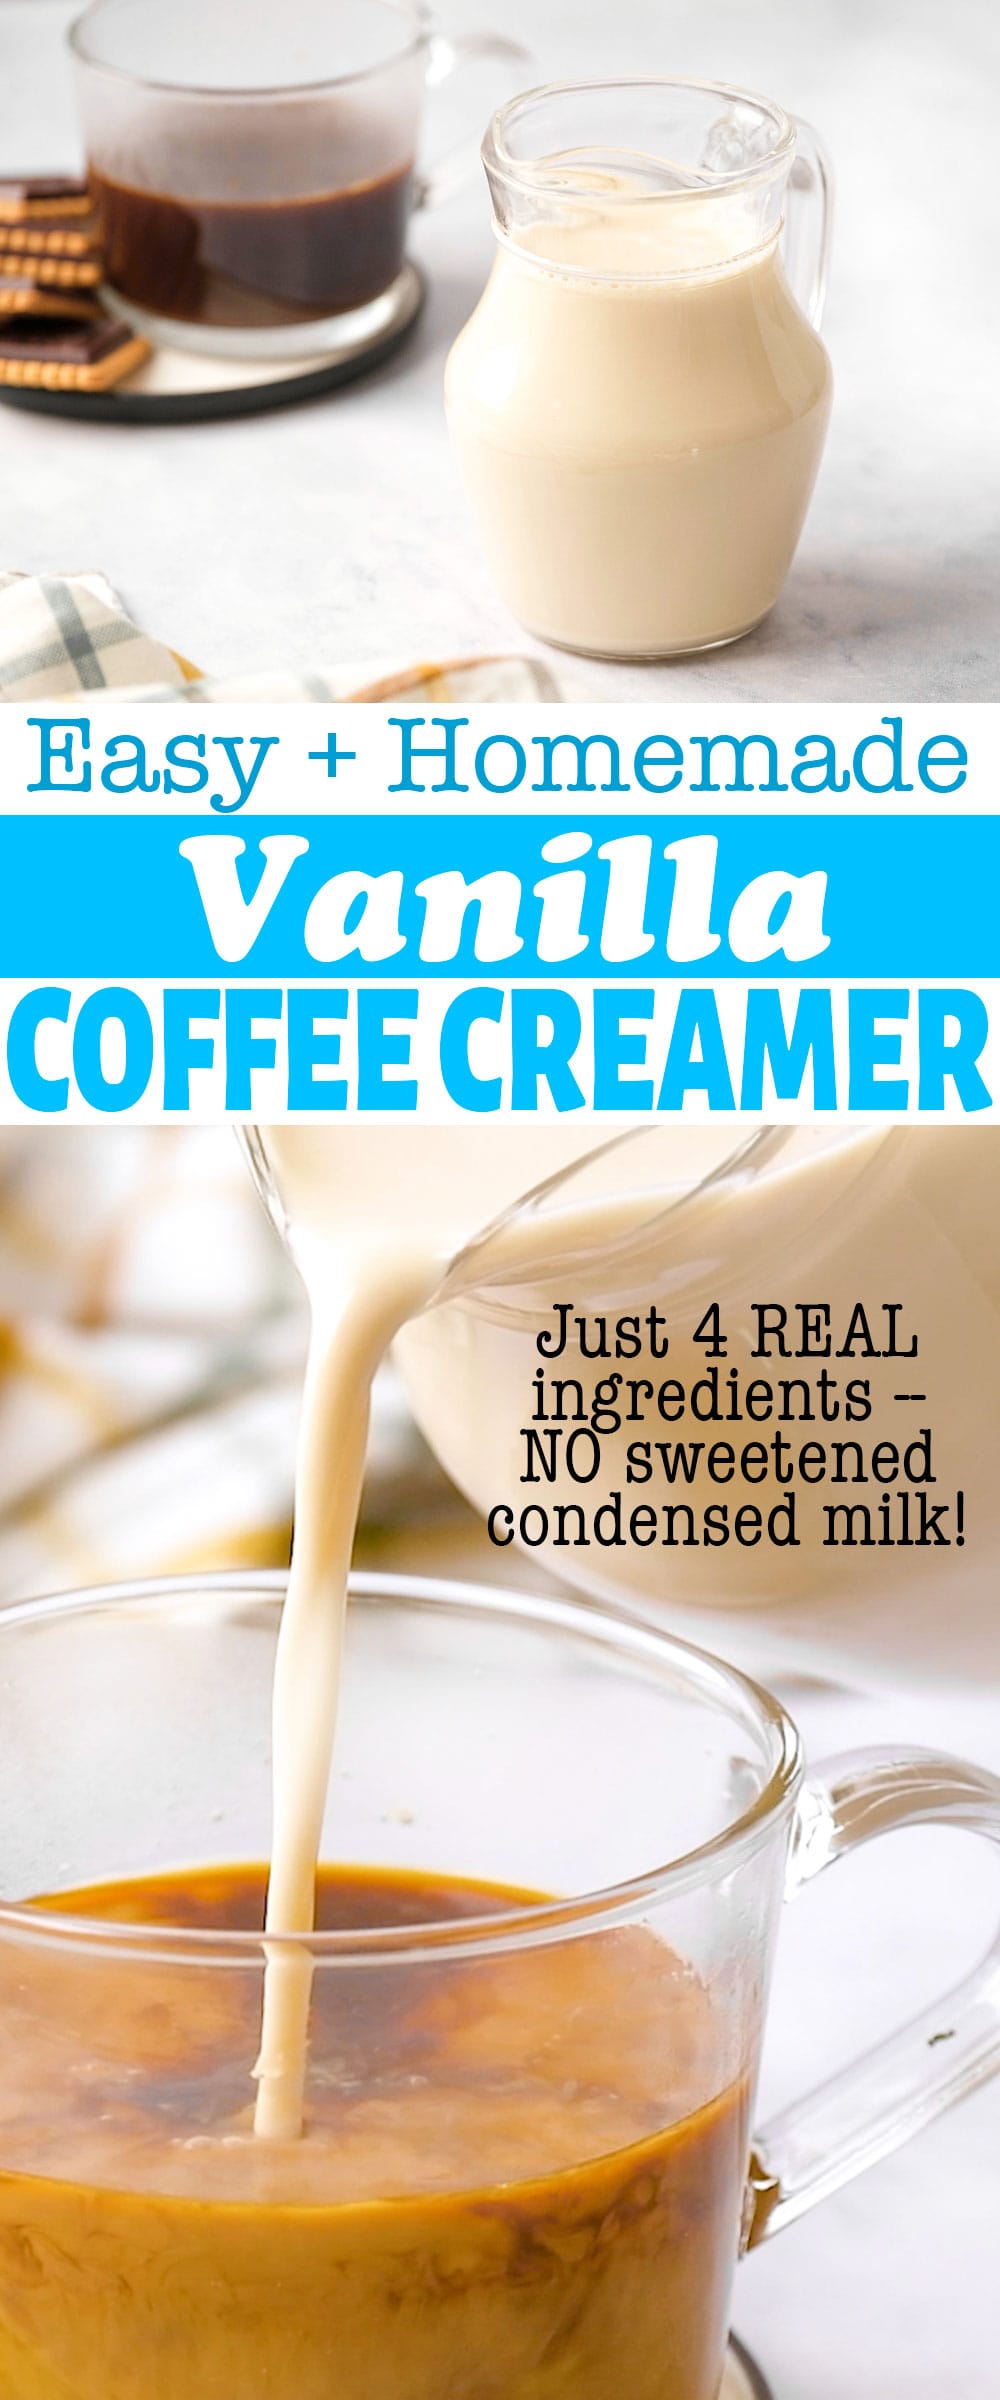 Homemade Vanilla Coffee Creamer ~ easy to make using just FOUR simple, real ingredients. This 5-minute recipe is flavored with vanilla extract and sweetened with maple syrup. Learn how to make coffee creamer without condensed milk! | FiveHeartHome.com via @fivehearthome